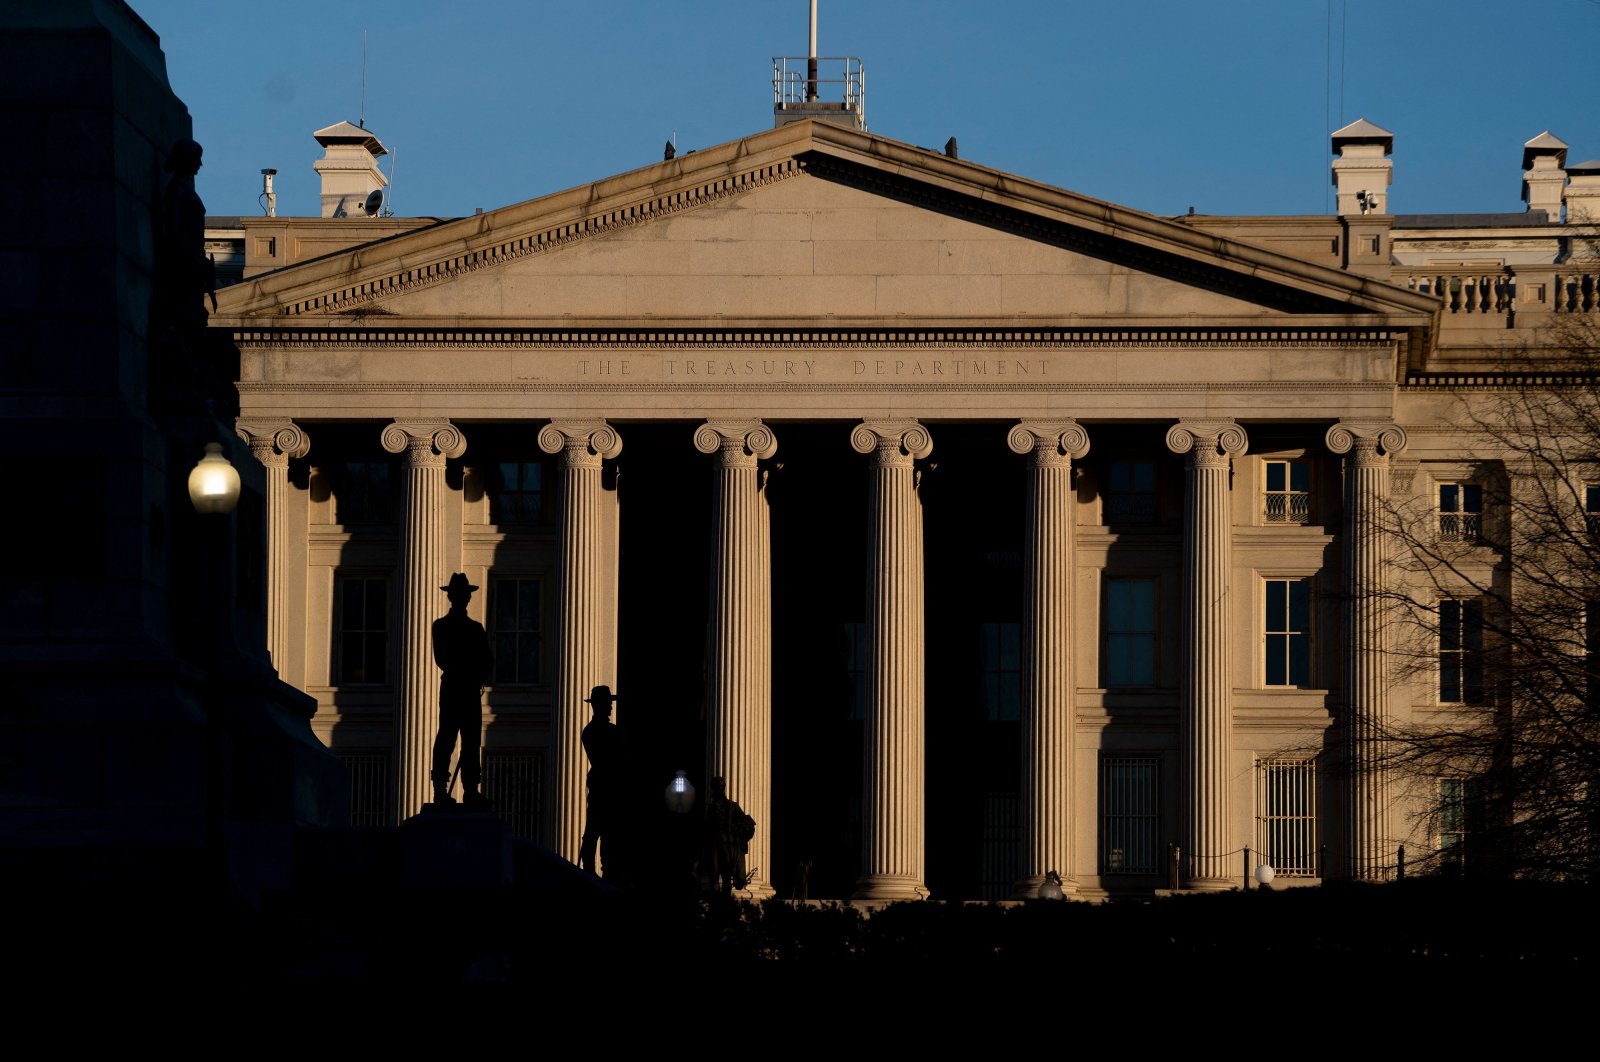 The United States Department of Treasury building can be seen in Washington, U.S., Jan. 12, 2022. (AFP Photo)